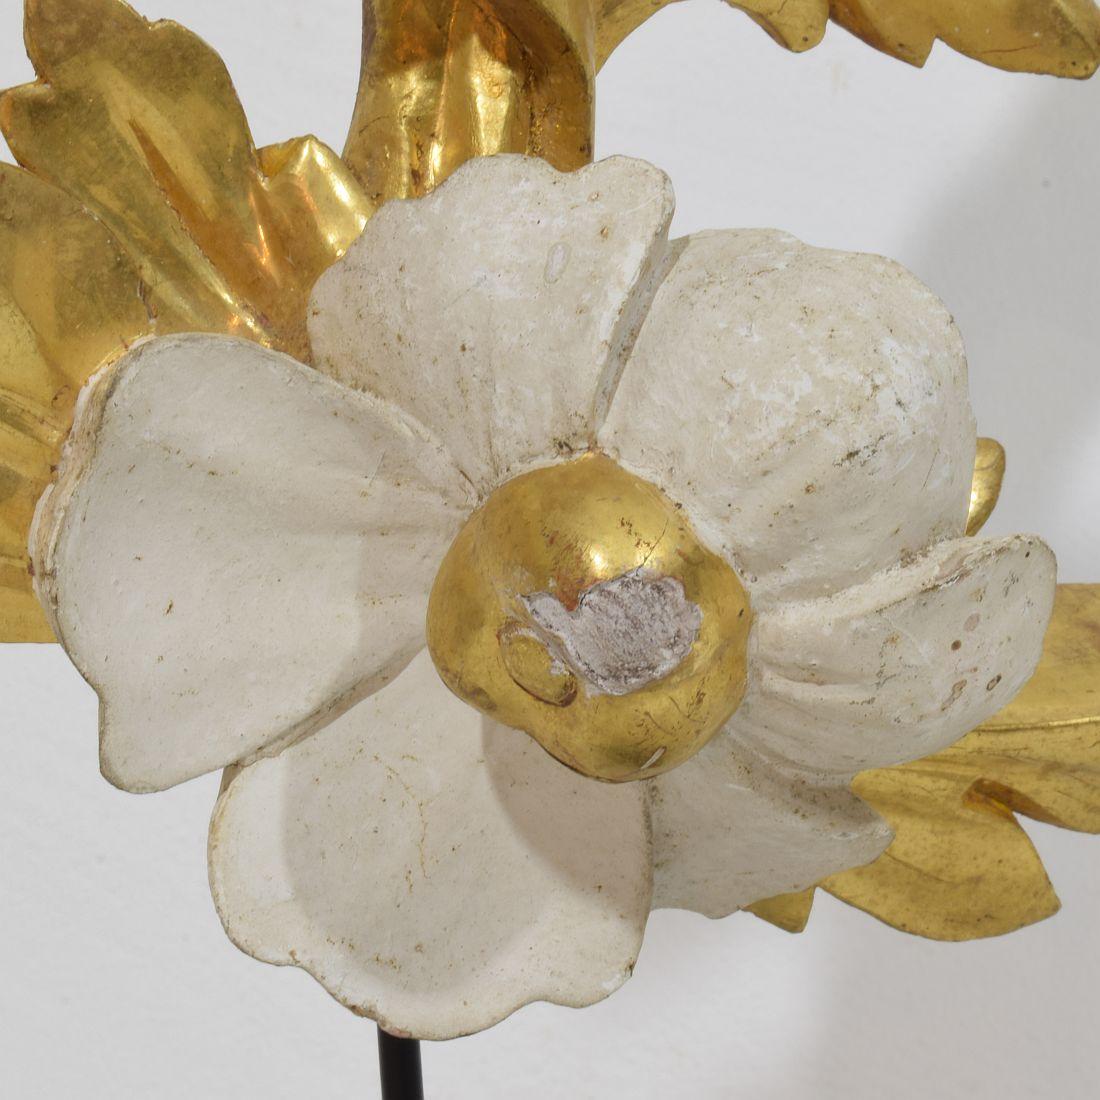 Italian 18/19th Century Hand Carved Giltwood Floral Ornament For Sale 7